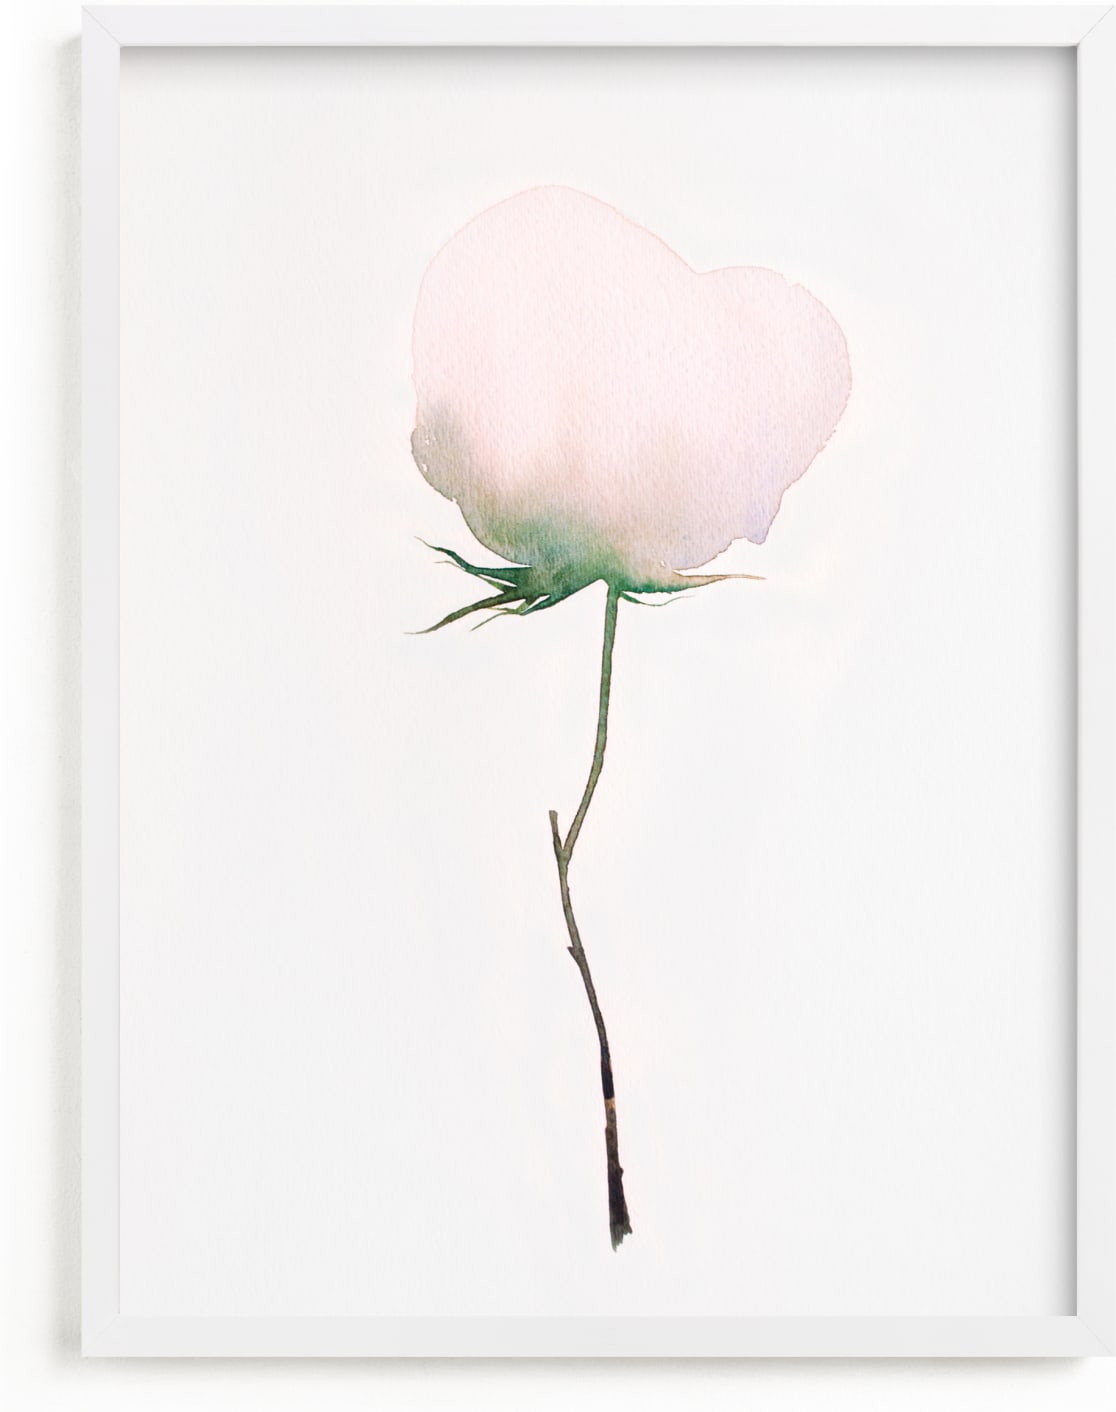 This is a white art by jinseikou called Budding Peony.